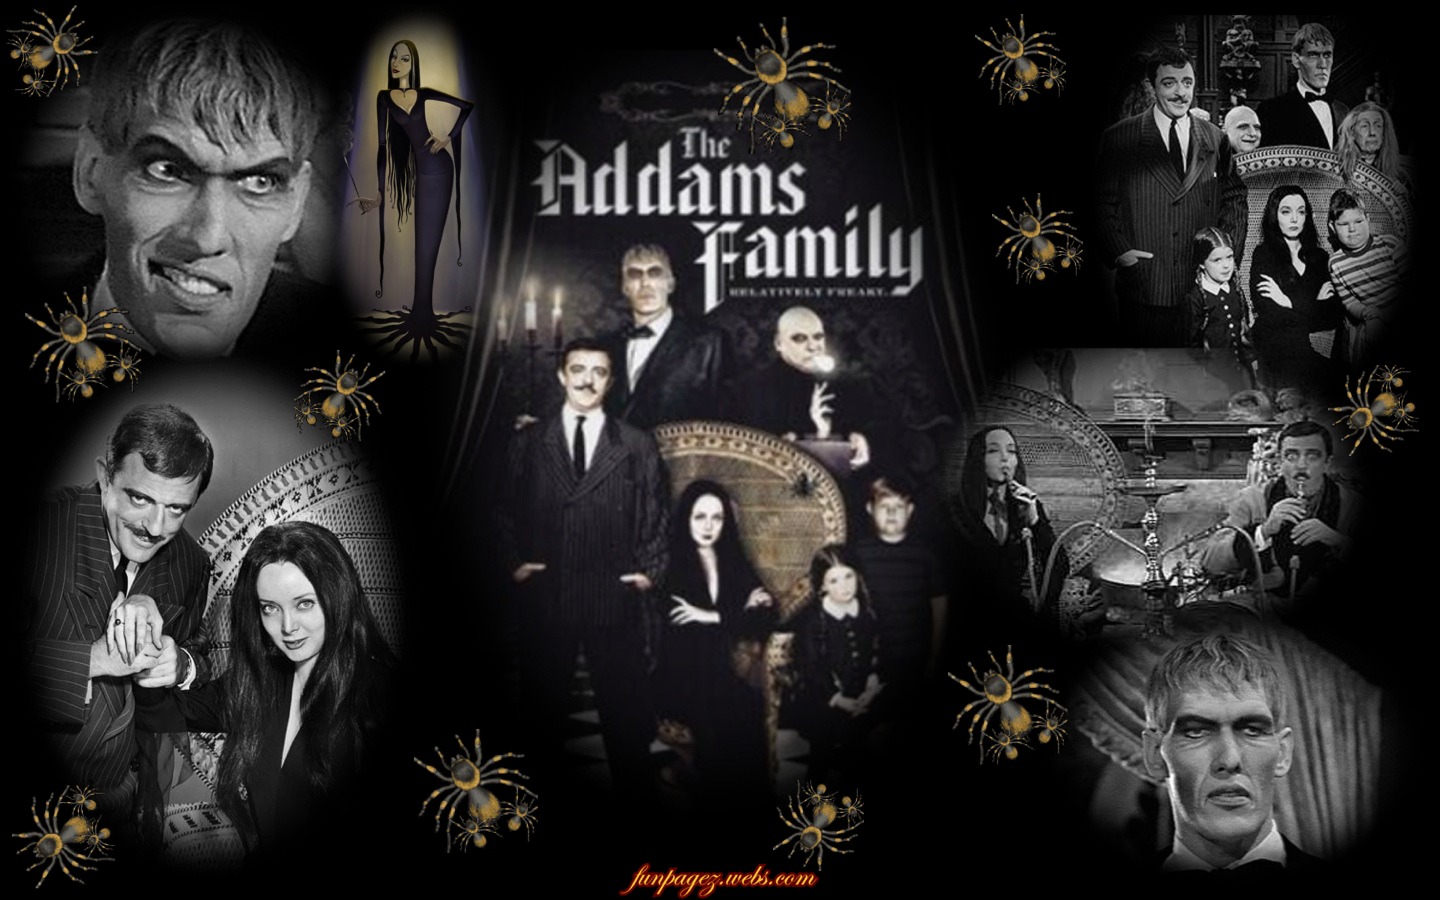 Addams Family 60s Wallpaper By Mardi S Funz Featuring The Dark